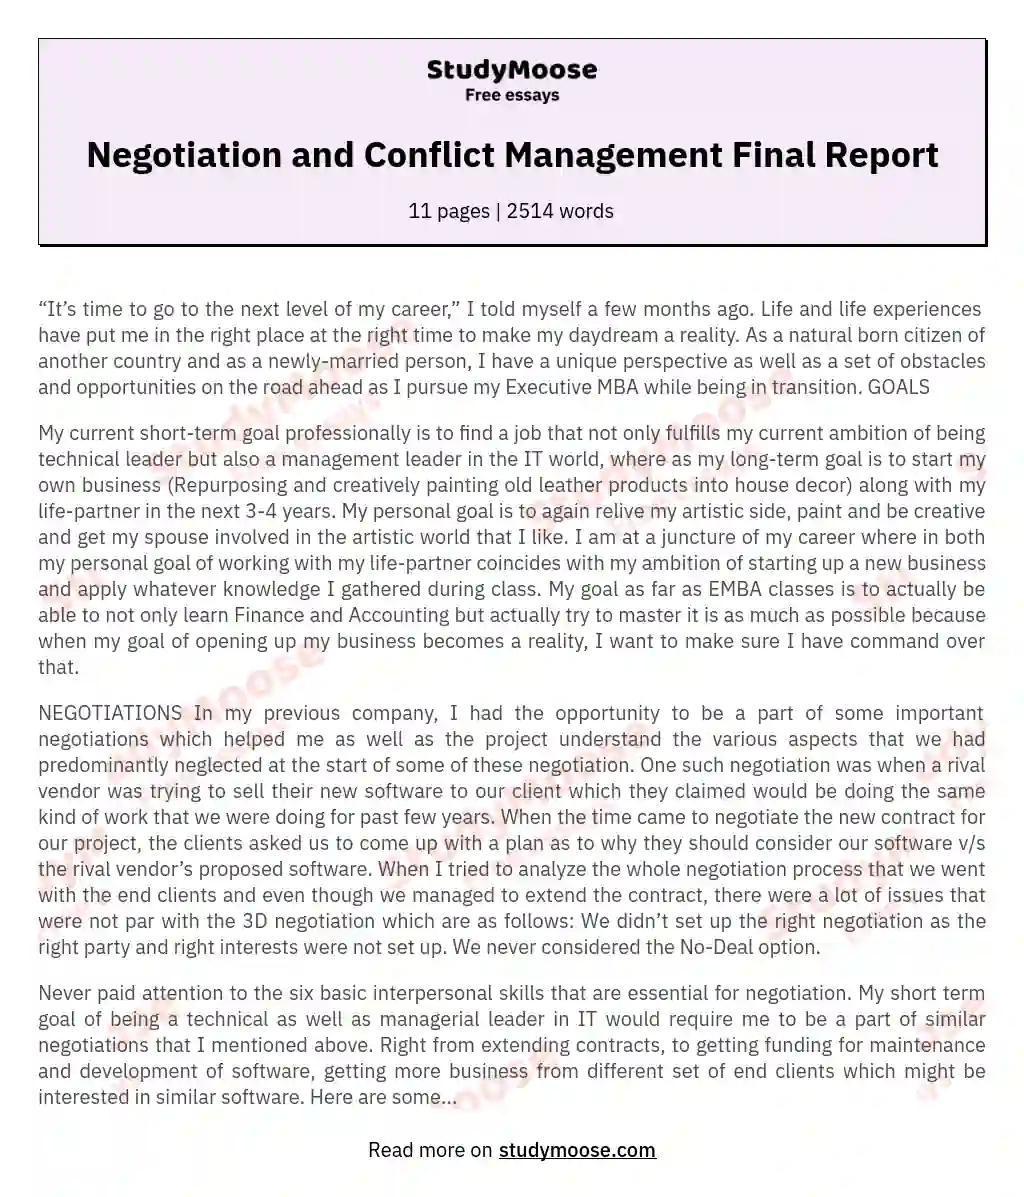 Negotiation and Conflict Management Final Report essay